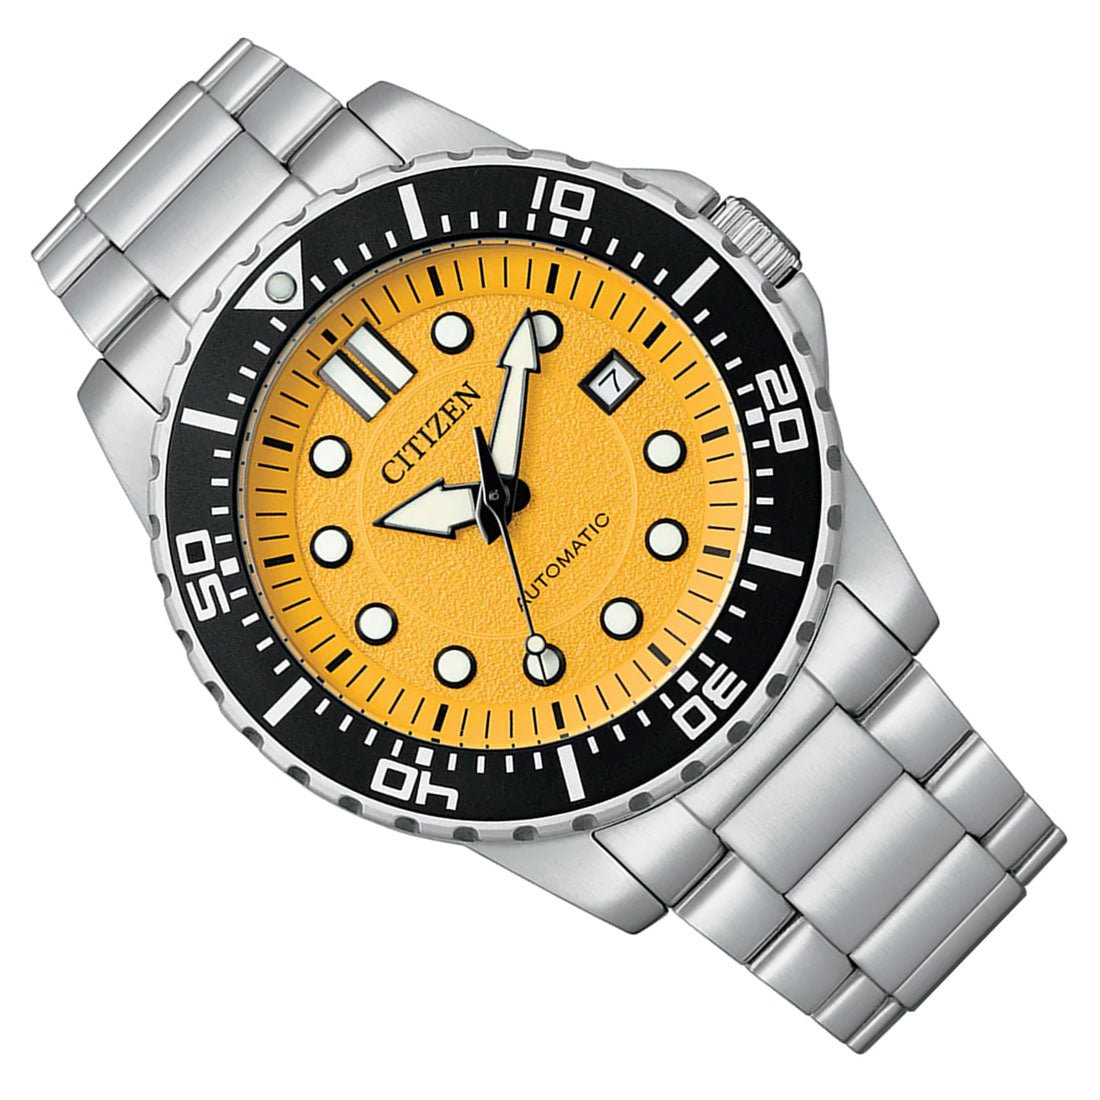 Citizen Automatic Urban NJ0170-83Z Yellow Dial Stainless Steel Sports Watch -Citizen